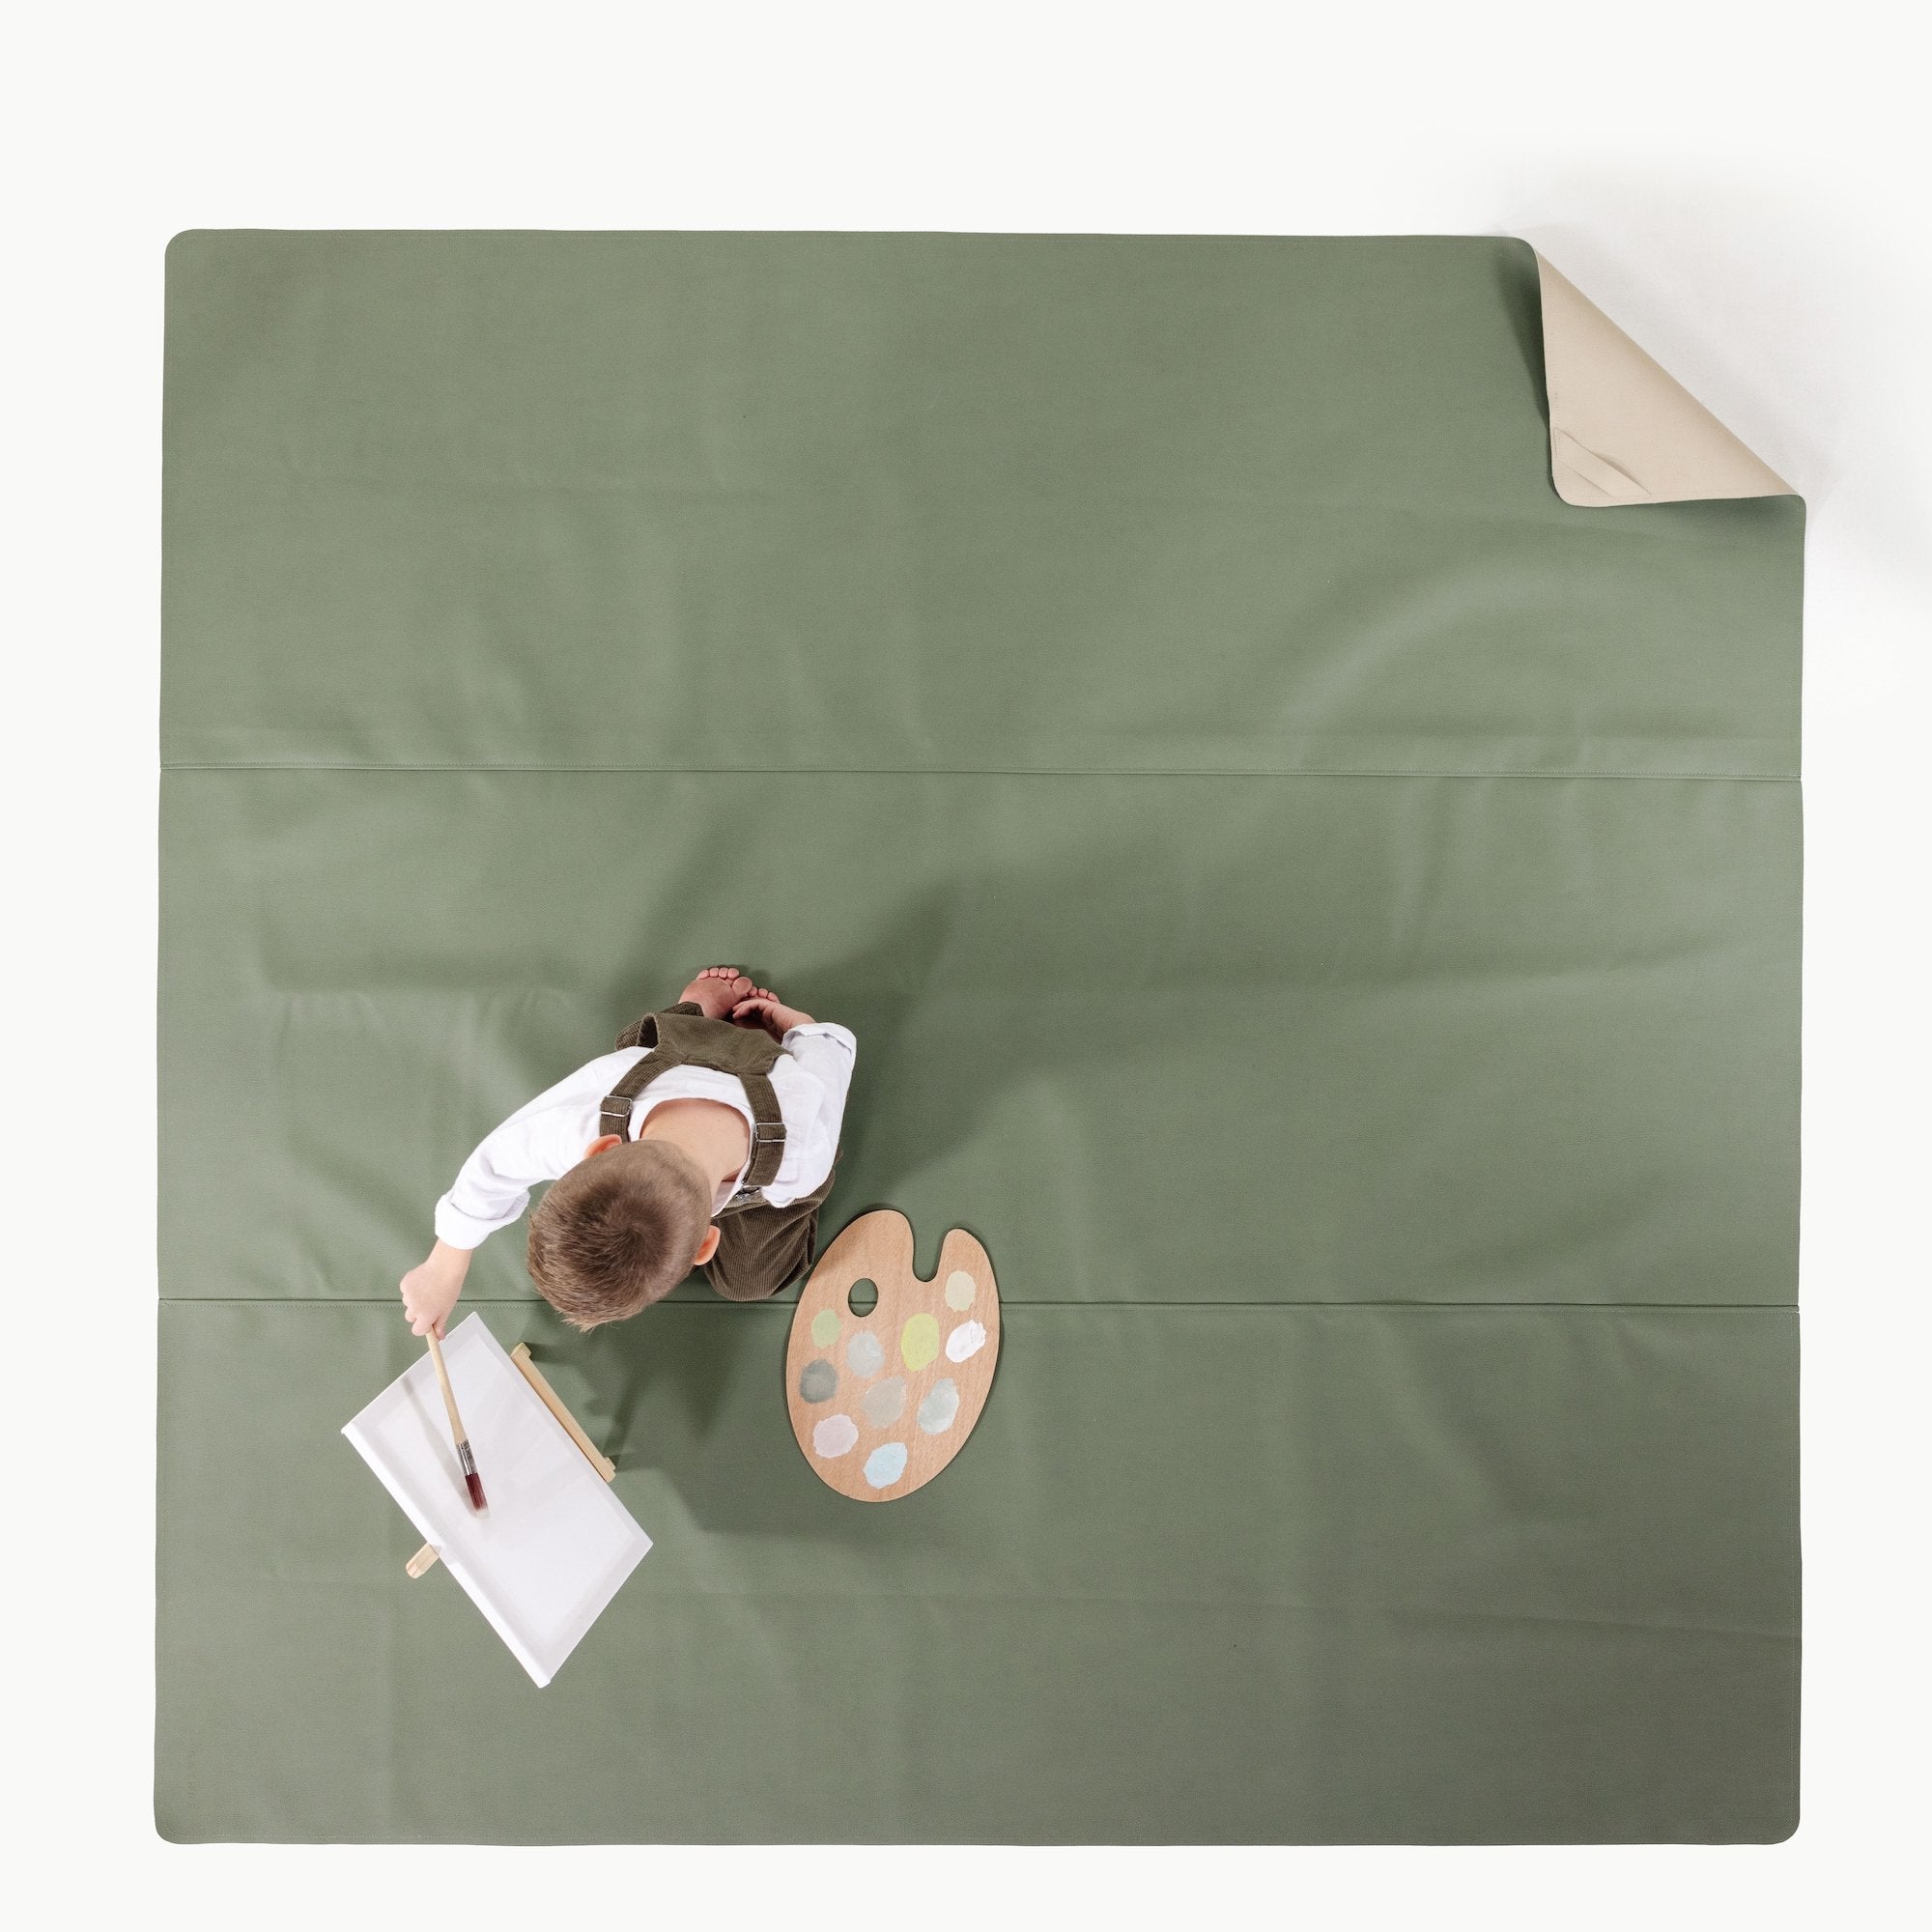 Thyme • Fog / Square@Overhead of kid playing on the Thyme/Fog Maxi Square Mat